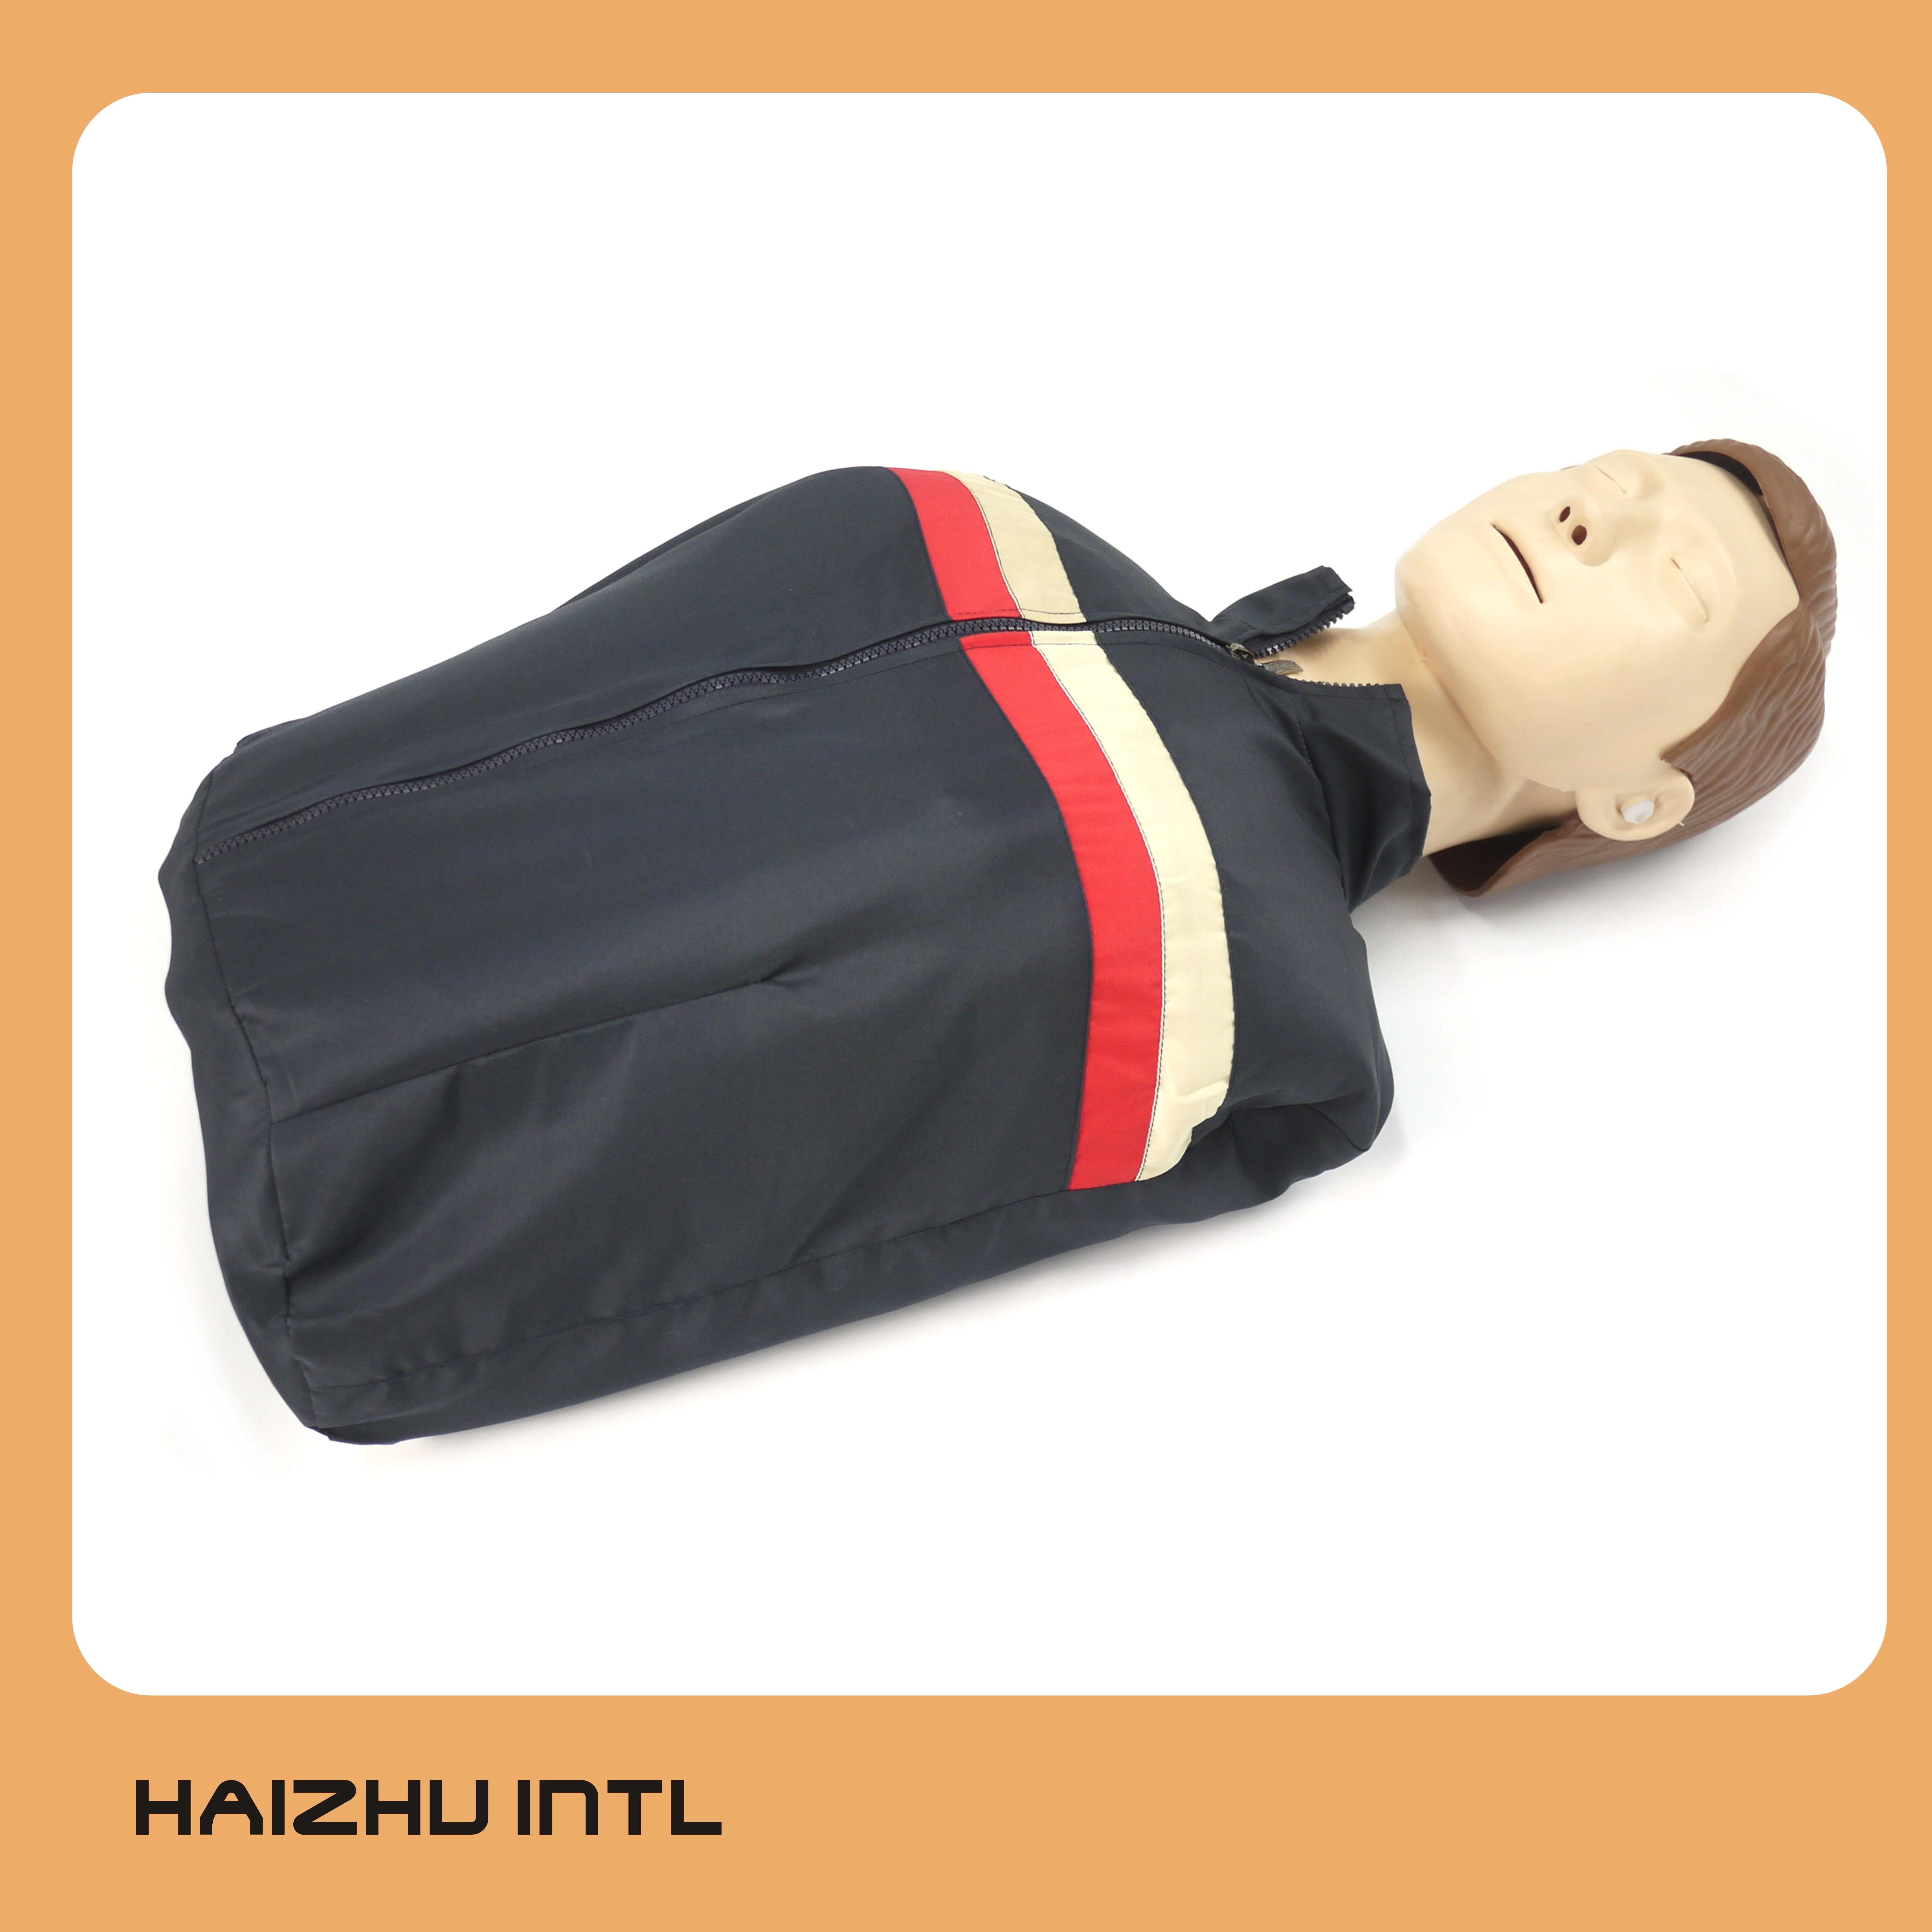 First aid mannequin for medical training, cpr medical dummy